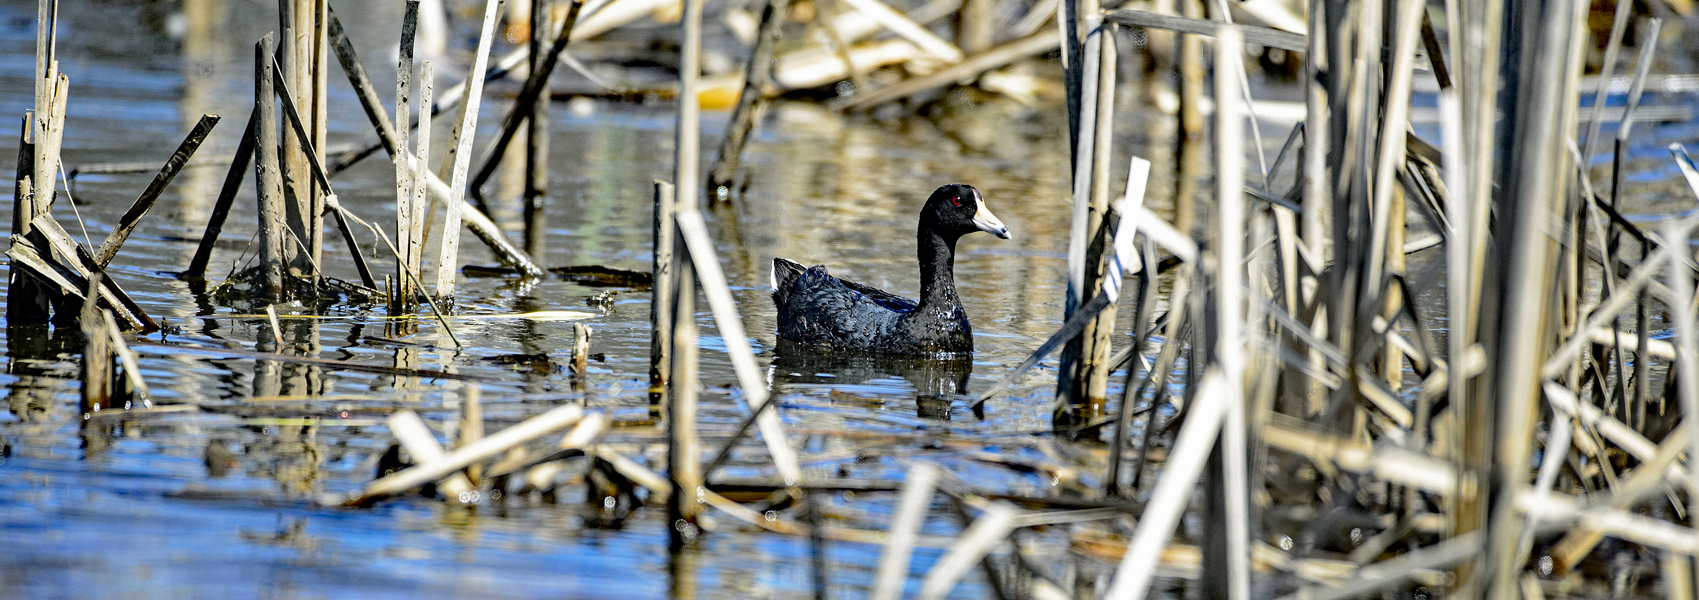 A duck floats in the water amid stickups and plants that have lost their foliage